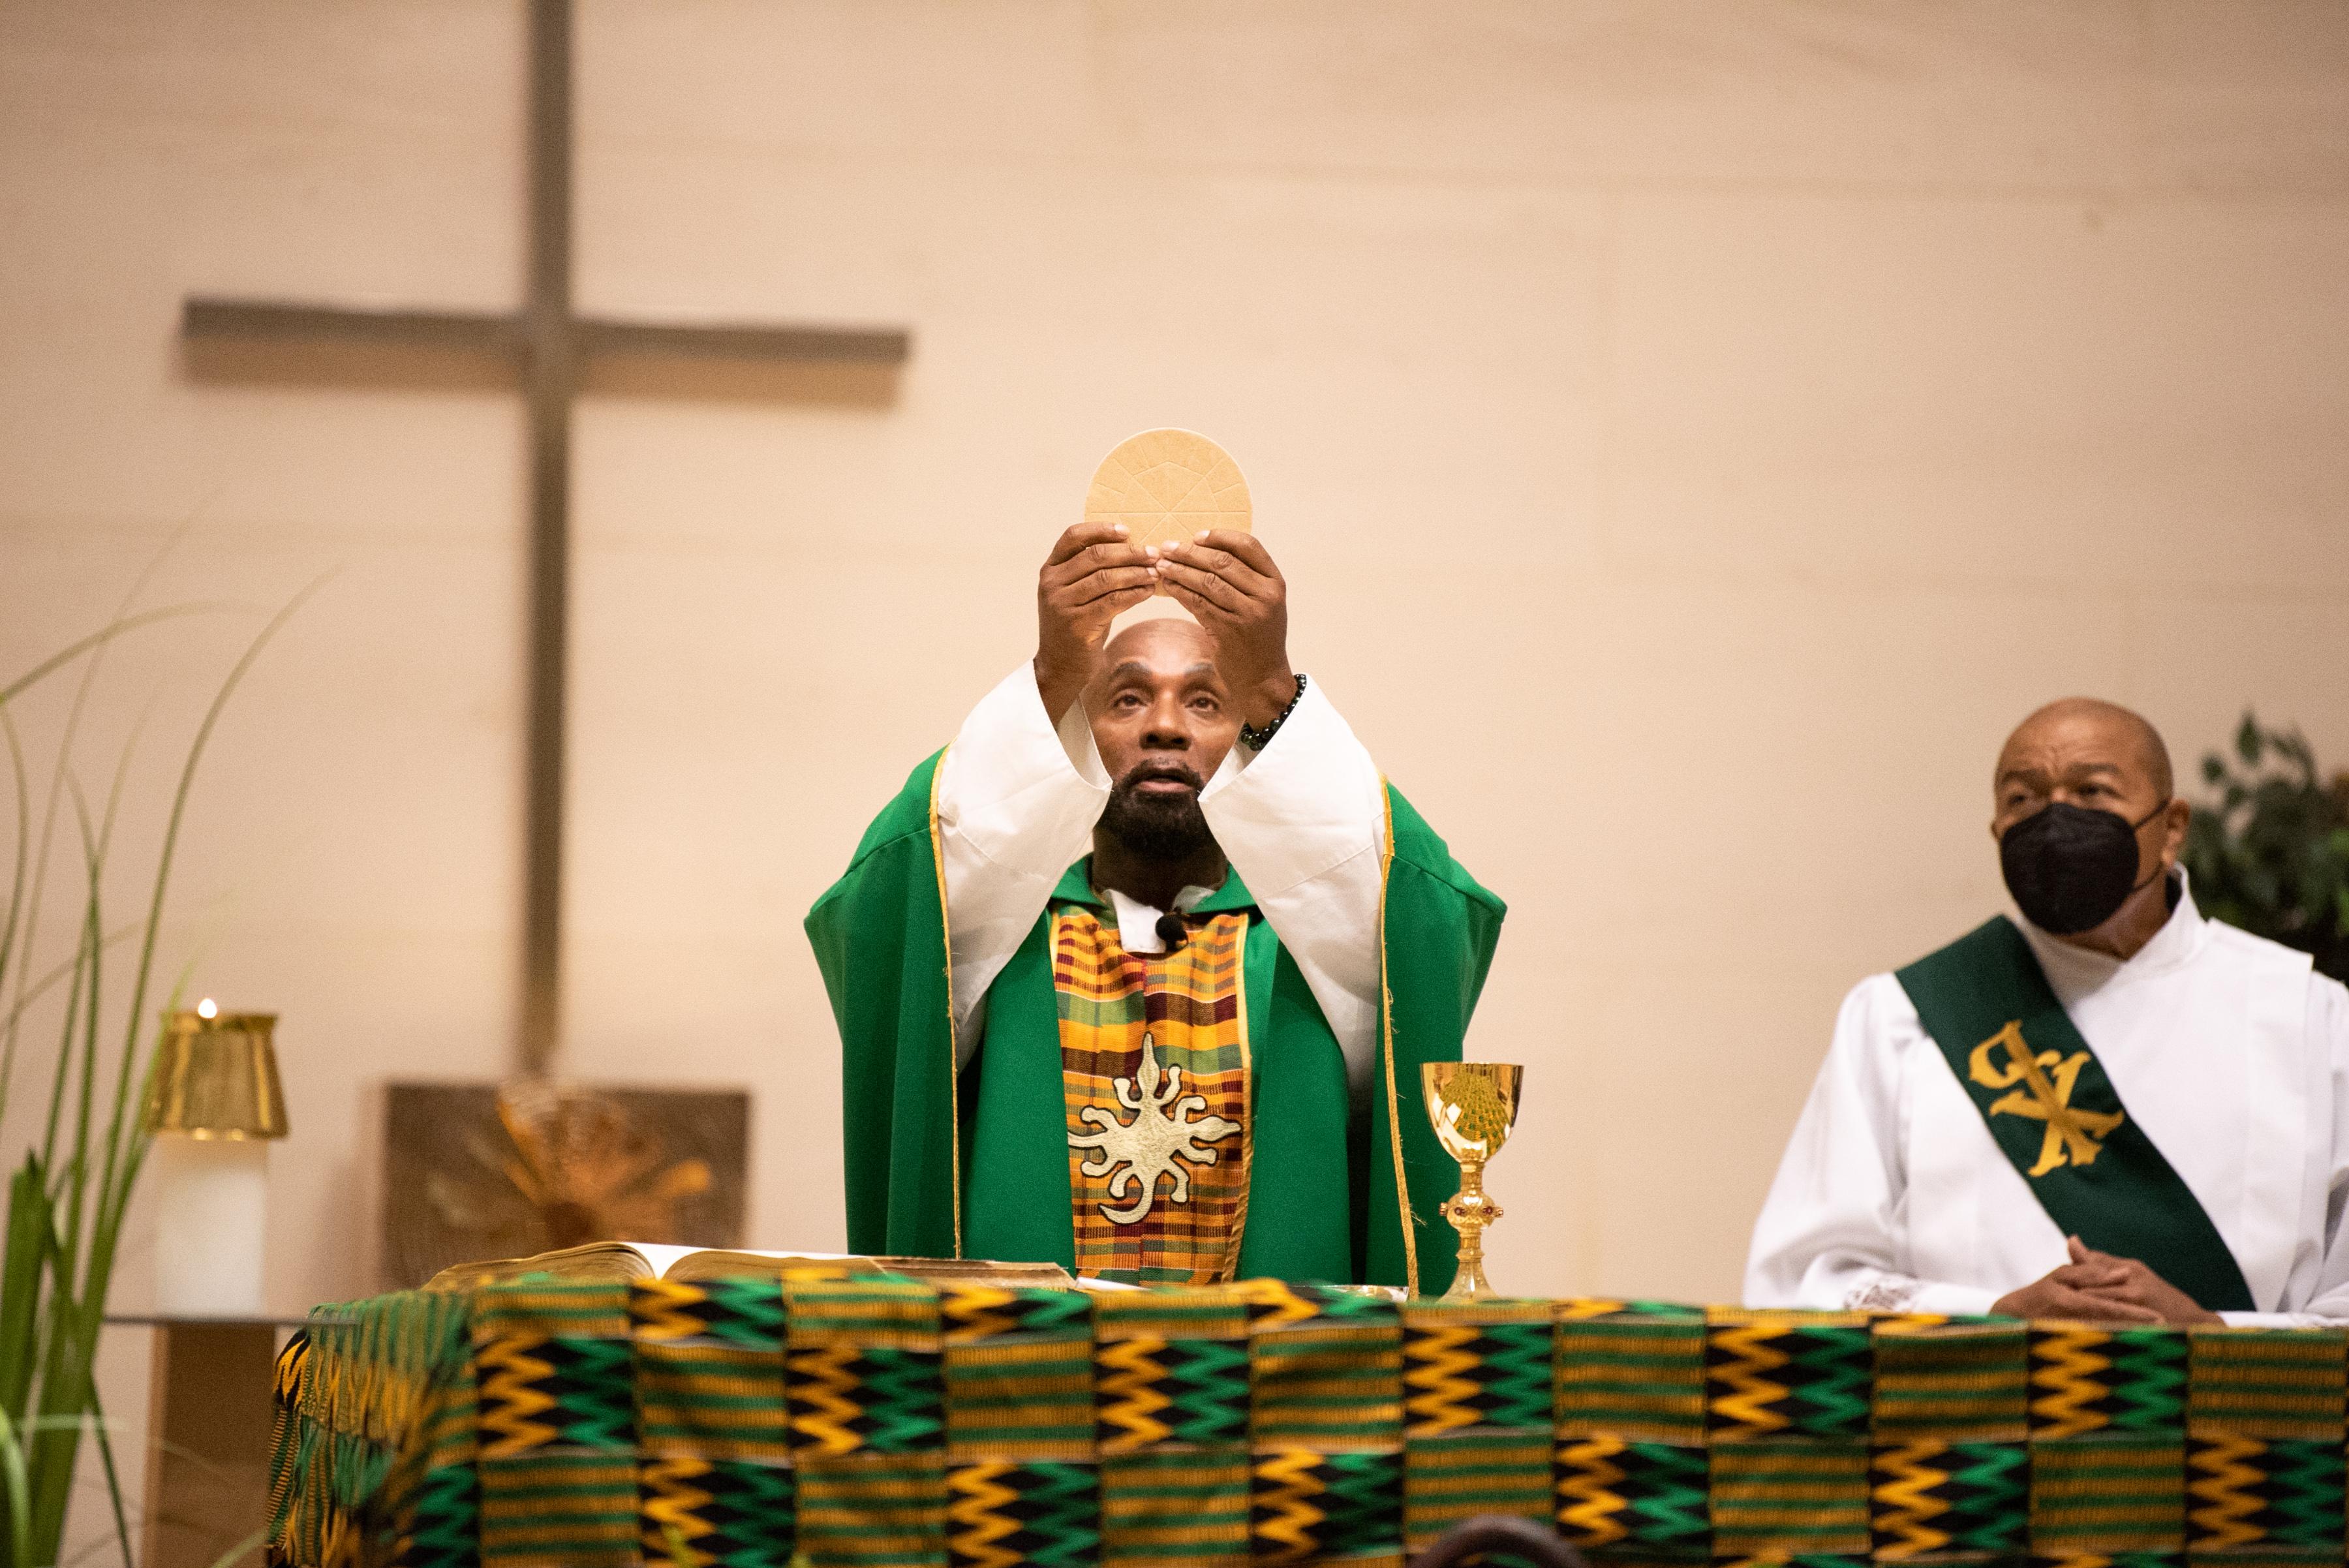 Earn your masters with the Institute for Black Catholic Studies